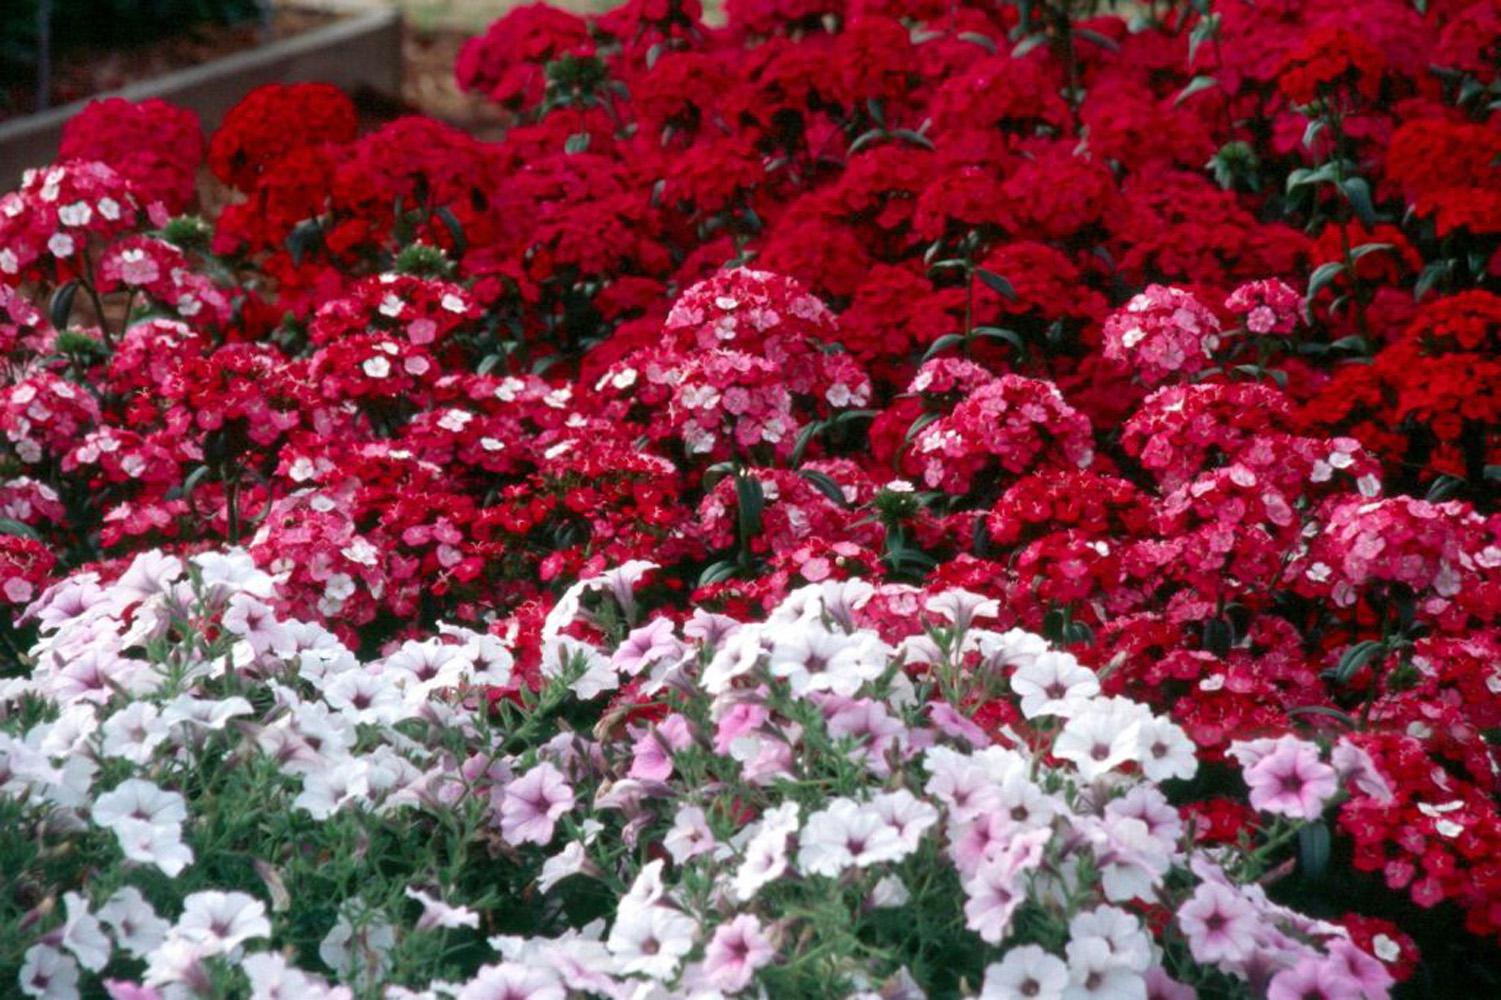 Amazon Rose Magic and Amazon Cherry display rich and vibrant colors in this bed at the Truck Crops Branch Experiment Station near Crystal Springs. Here, they are combined with Tidal Wave Silver petunia.